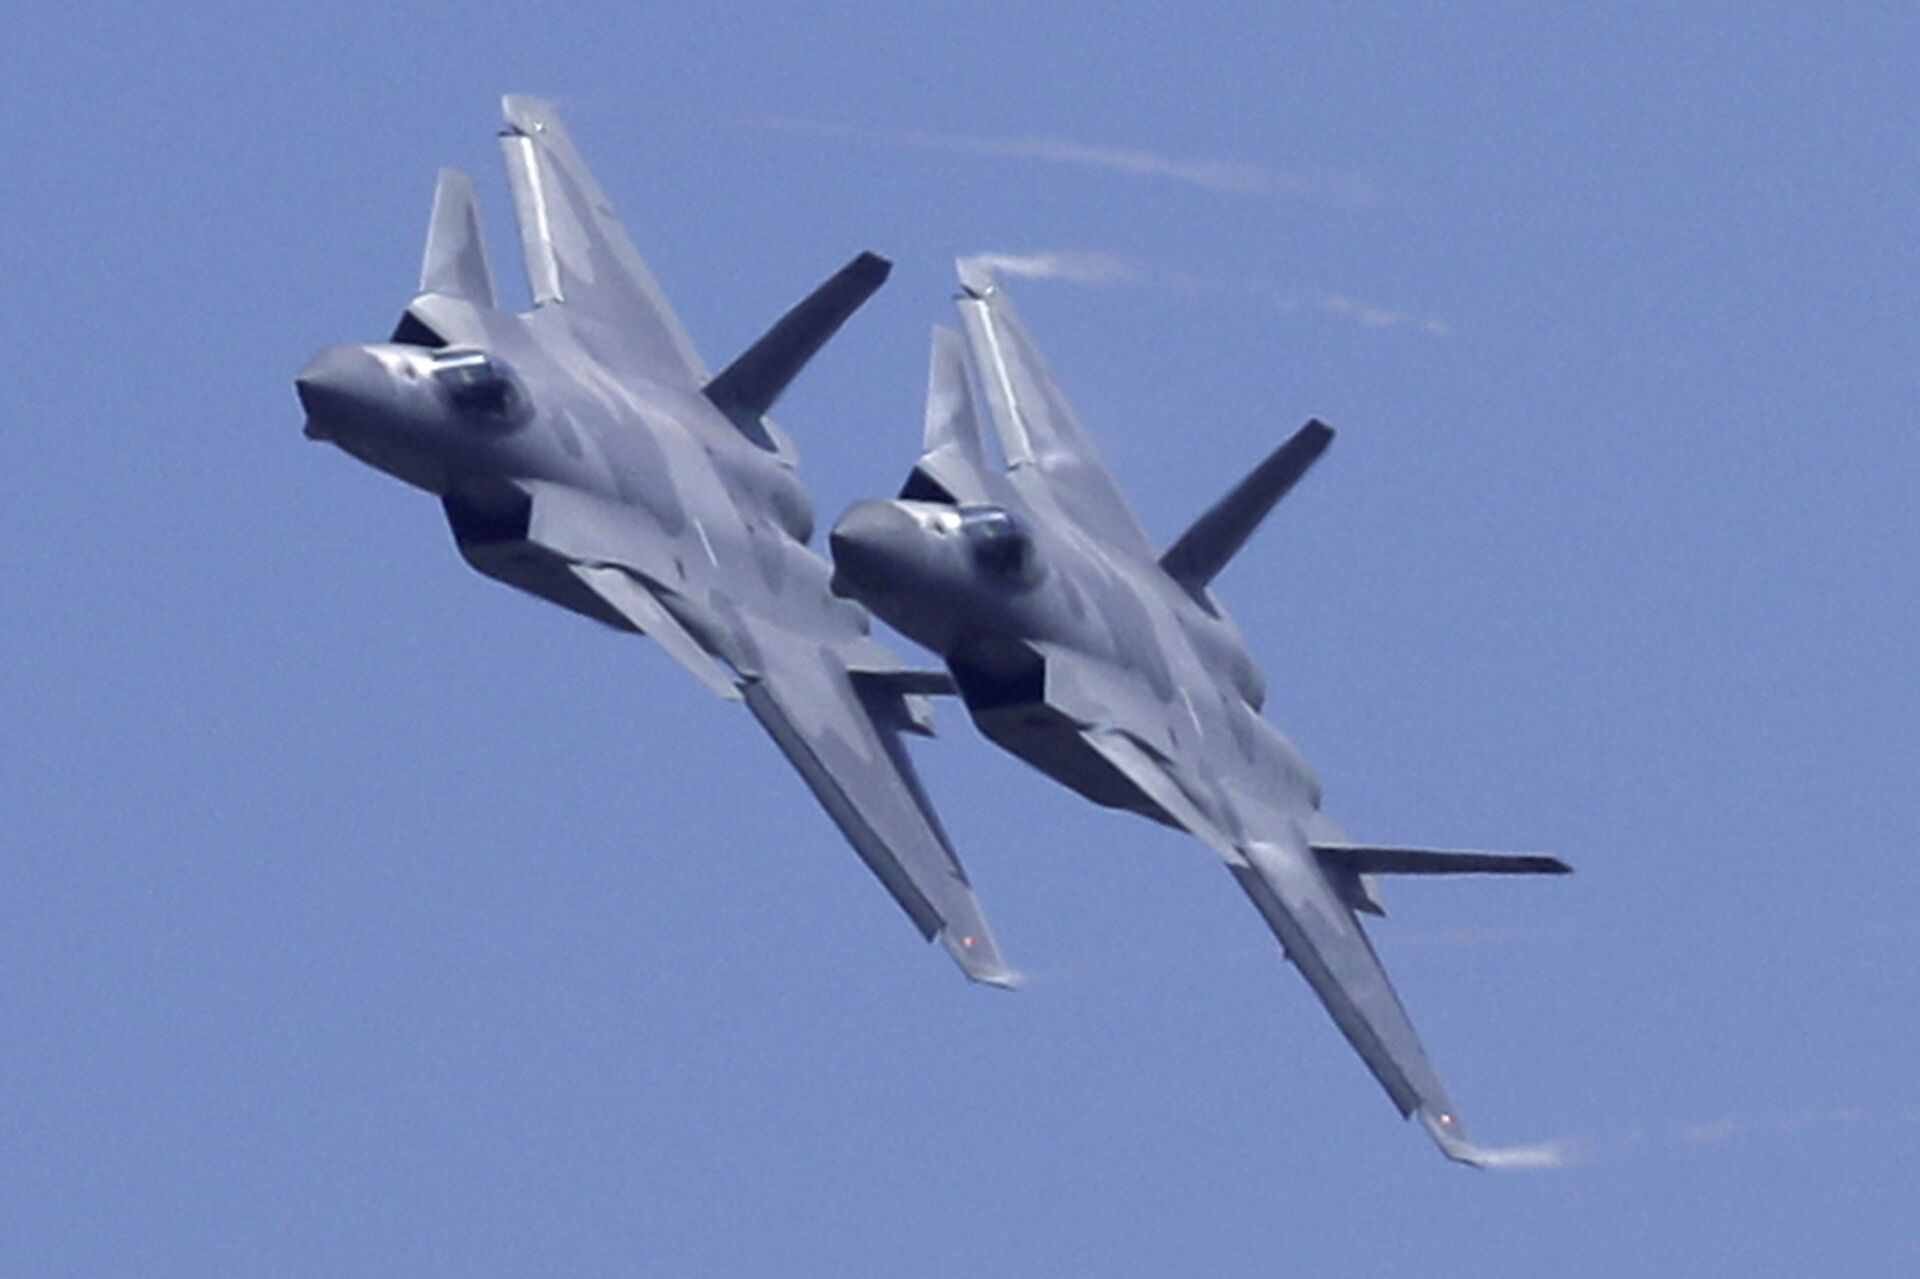 Two J-20 stealth fighter jets of the Chinese People's Liberation Army (PLA) Air Force performs during the 12th China International Aviation and Aerospace Exhibition, also known as Airshow China 2018, Tuesday, Nov. 6, 2018, in Zhuhai city, south China's Guangdong province - Sputnik International, 1920, 30.11.2022